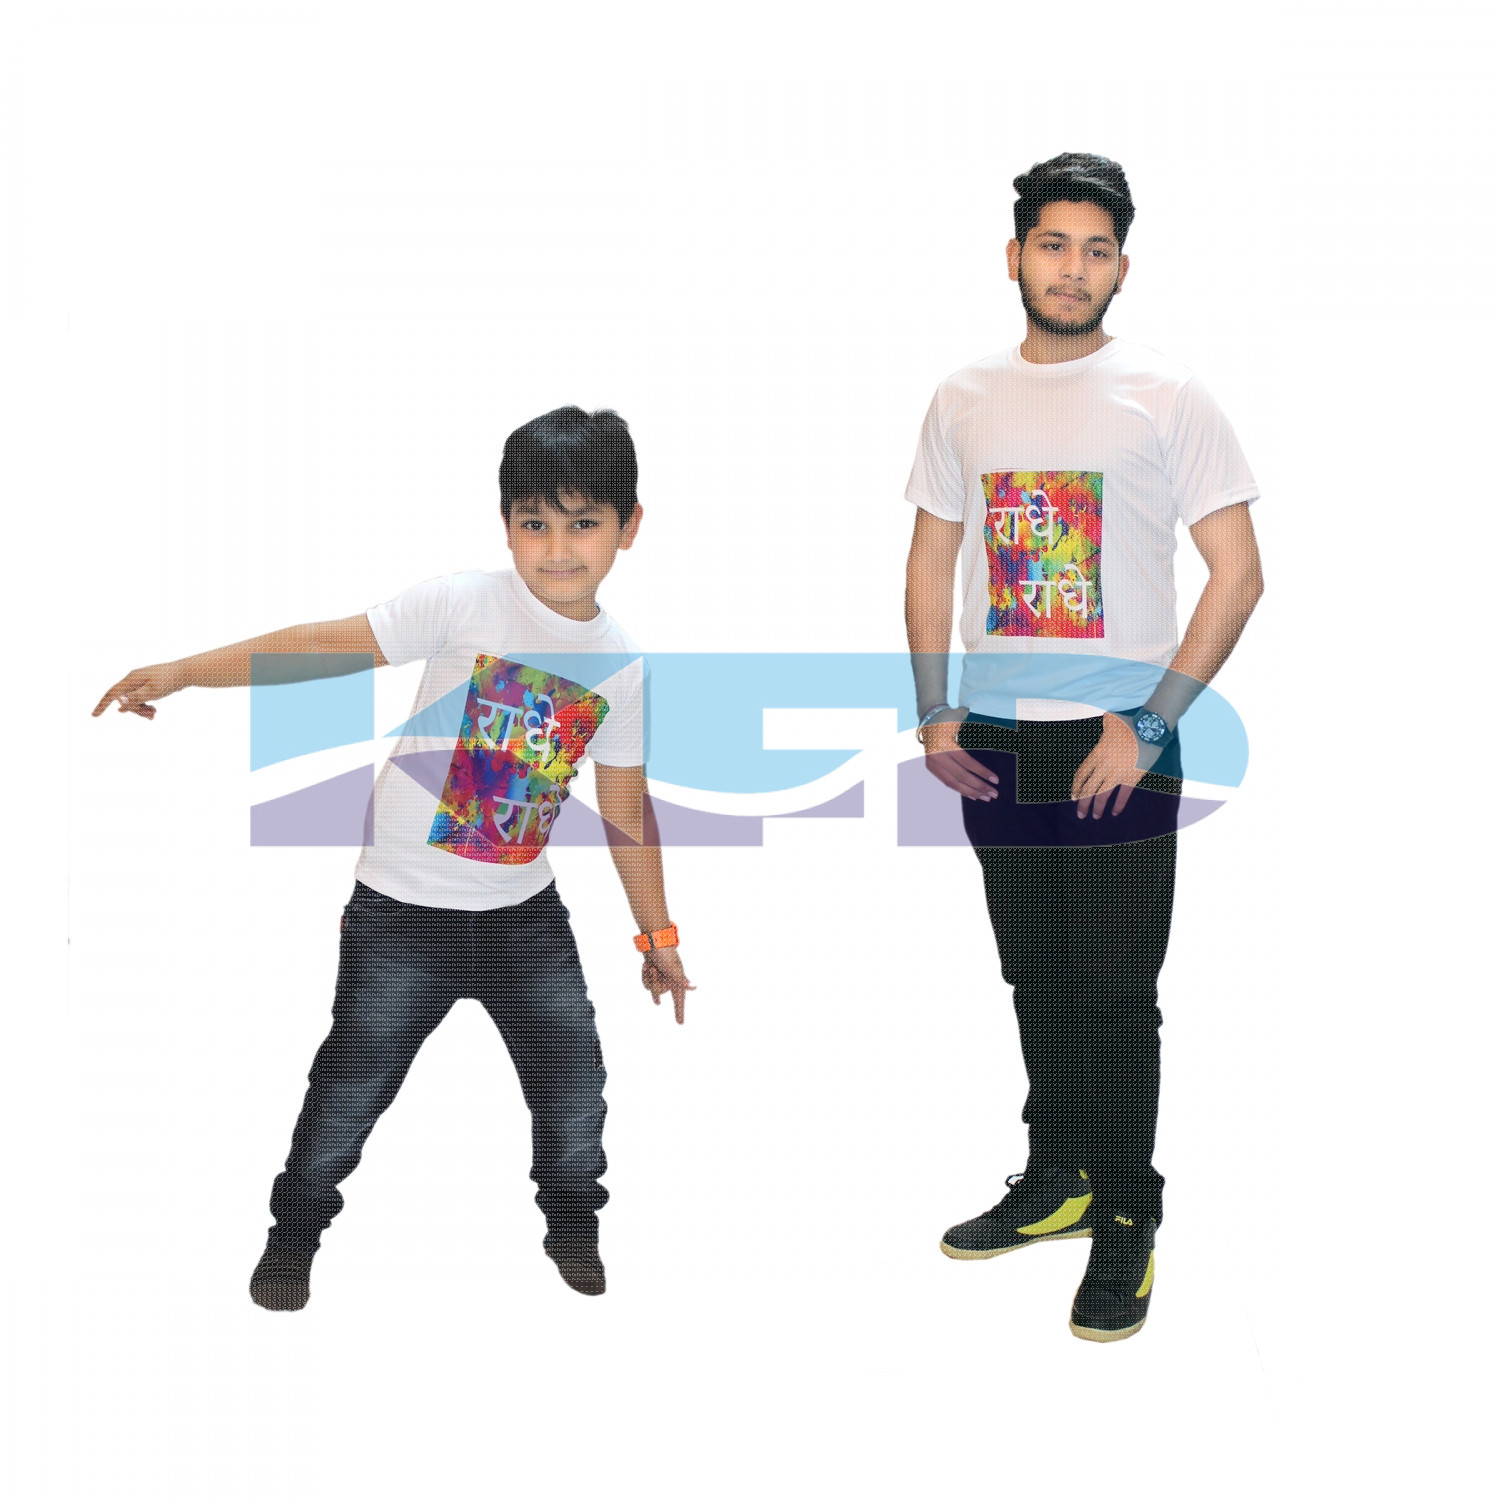 Radhe T-shirt Costume For Kids/Holi day/School Annual function/Theme Party/Competition/Stage Shows/Birthday Party Dress